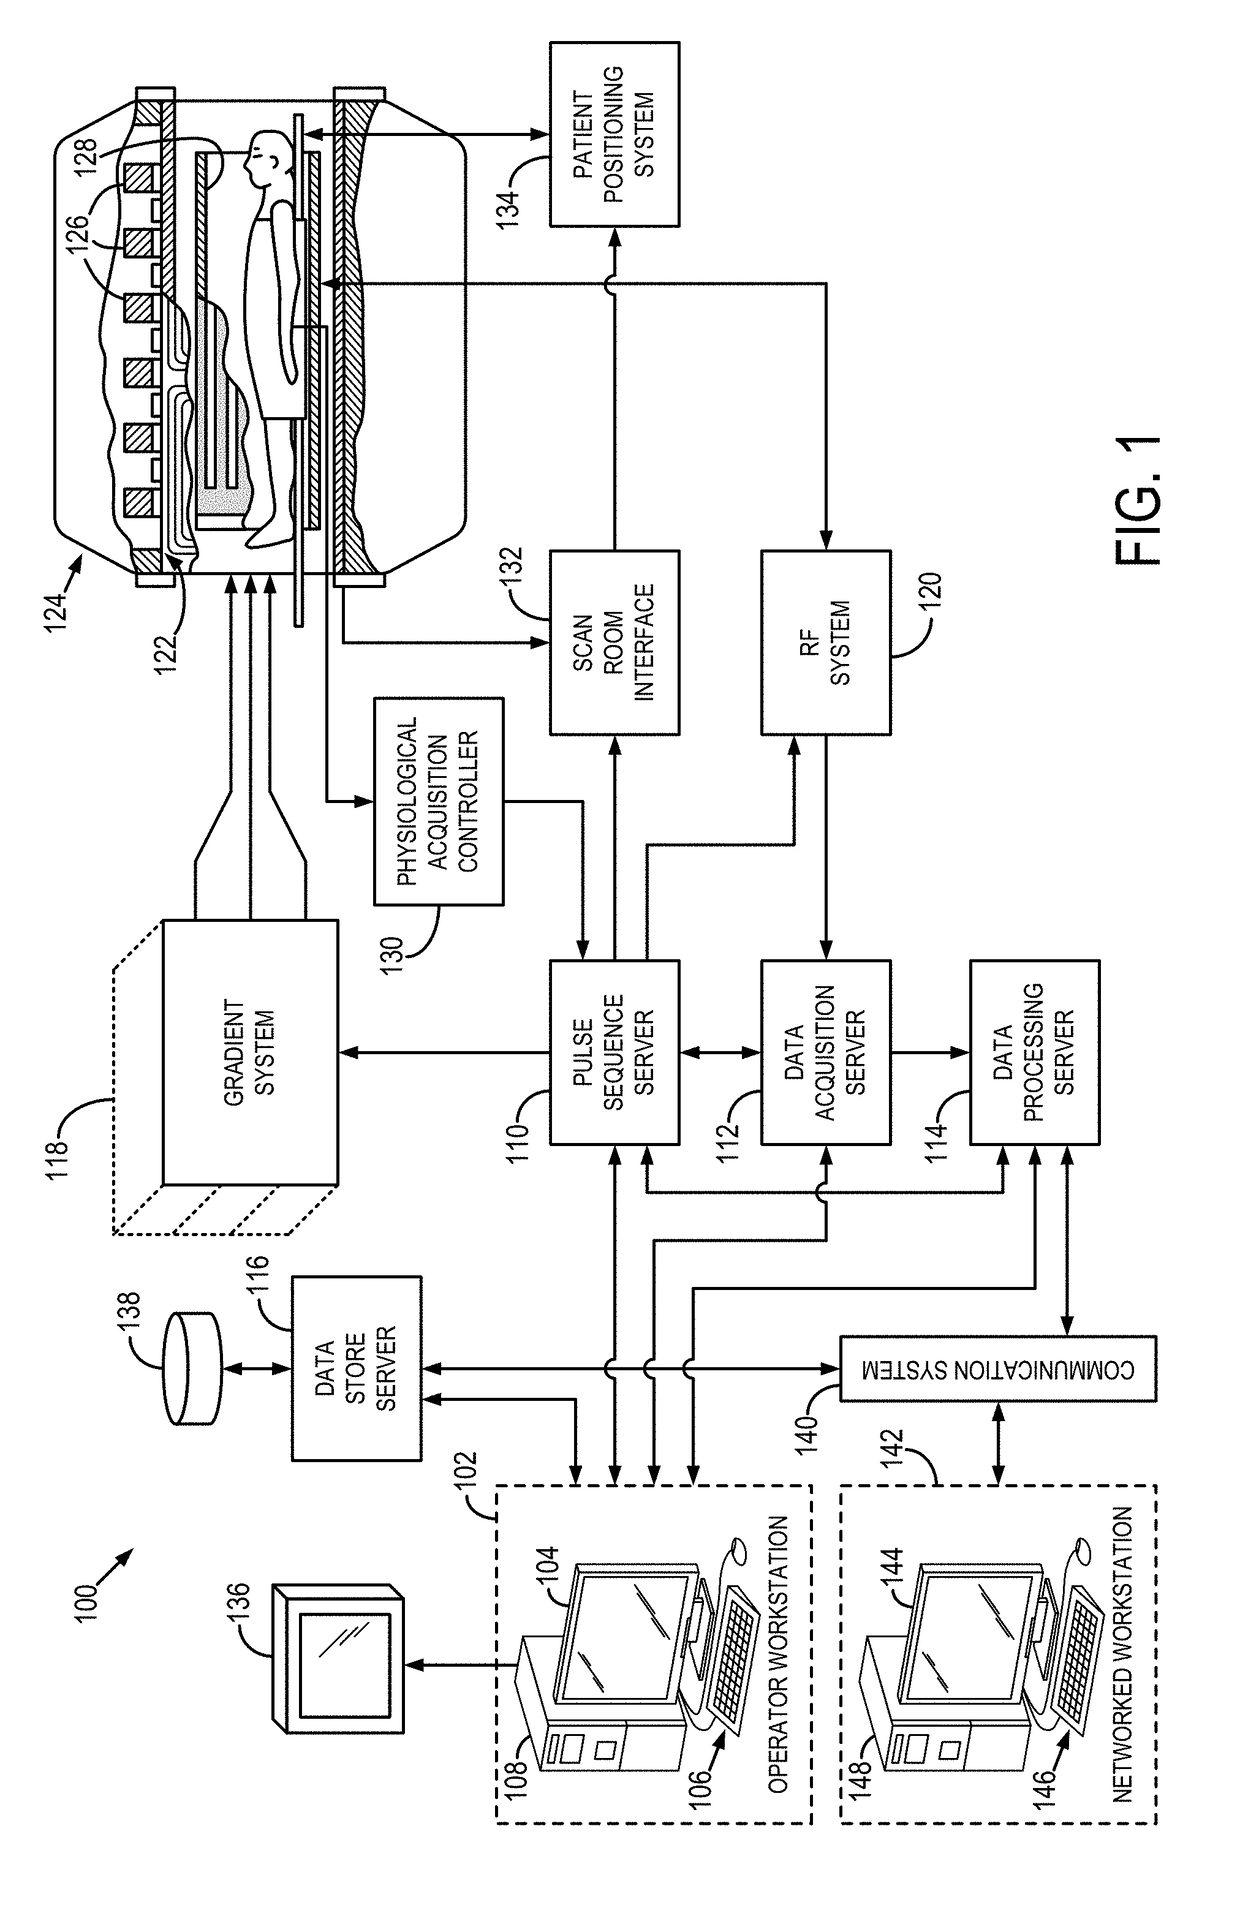 System and Method For Evaluation of Subjects Using Magnetic Resonance Imaging and Oxygen-17